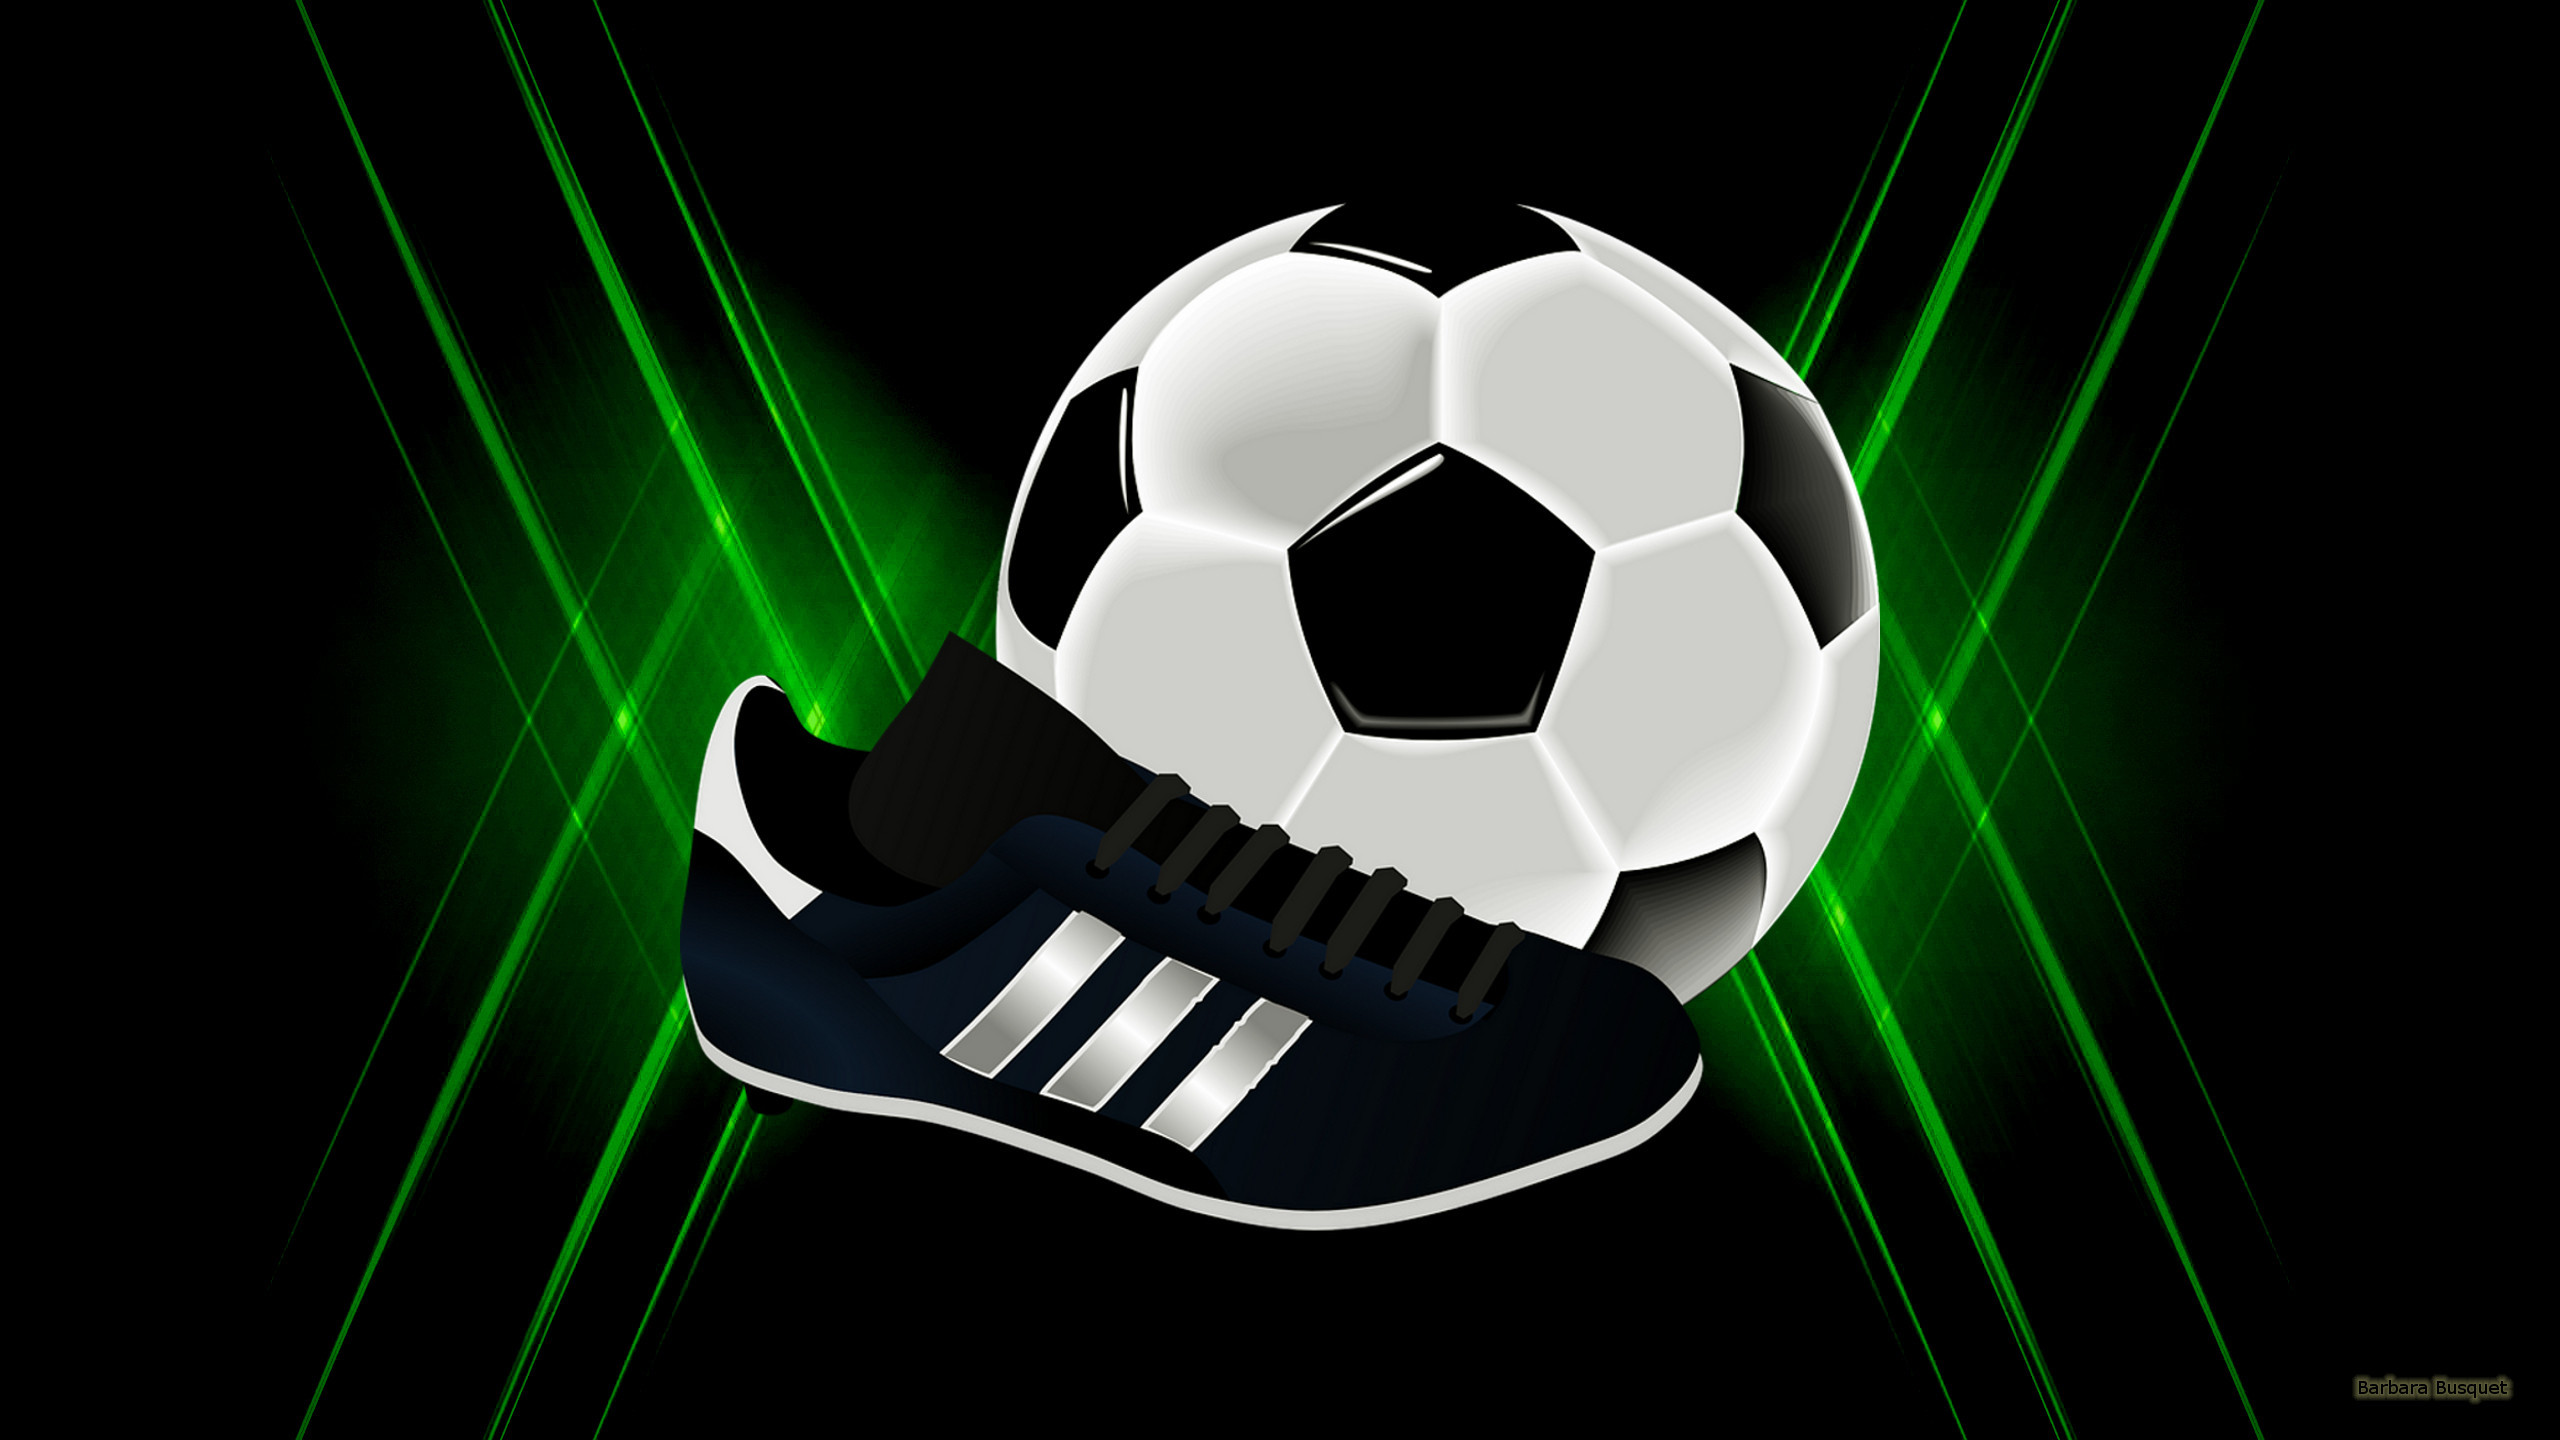 2560x1440 Soccer wallpaper with a football (or soccer ball??) and a dark blue shoe.